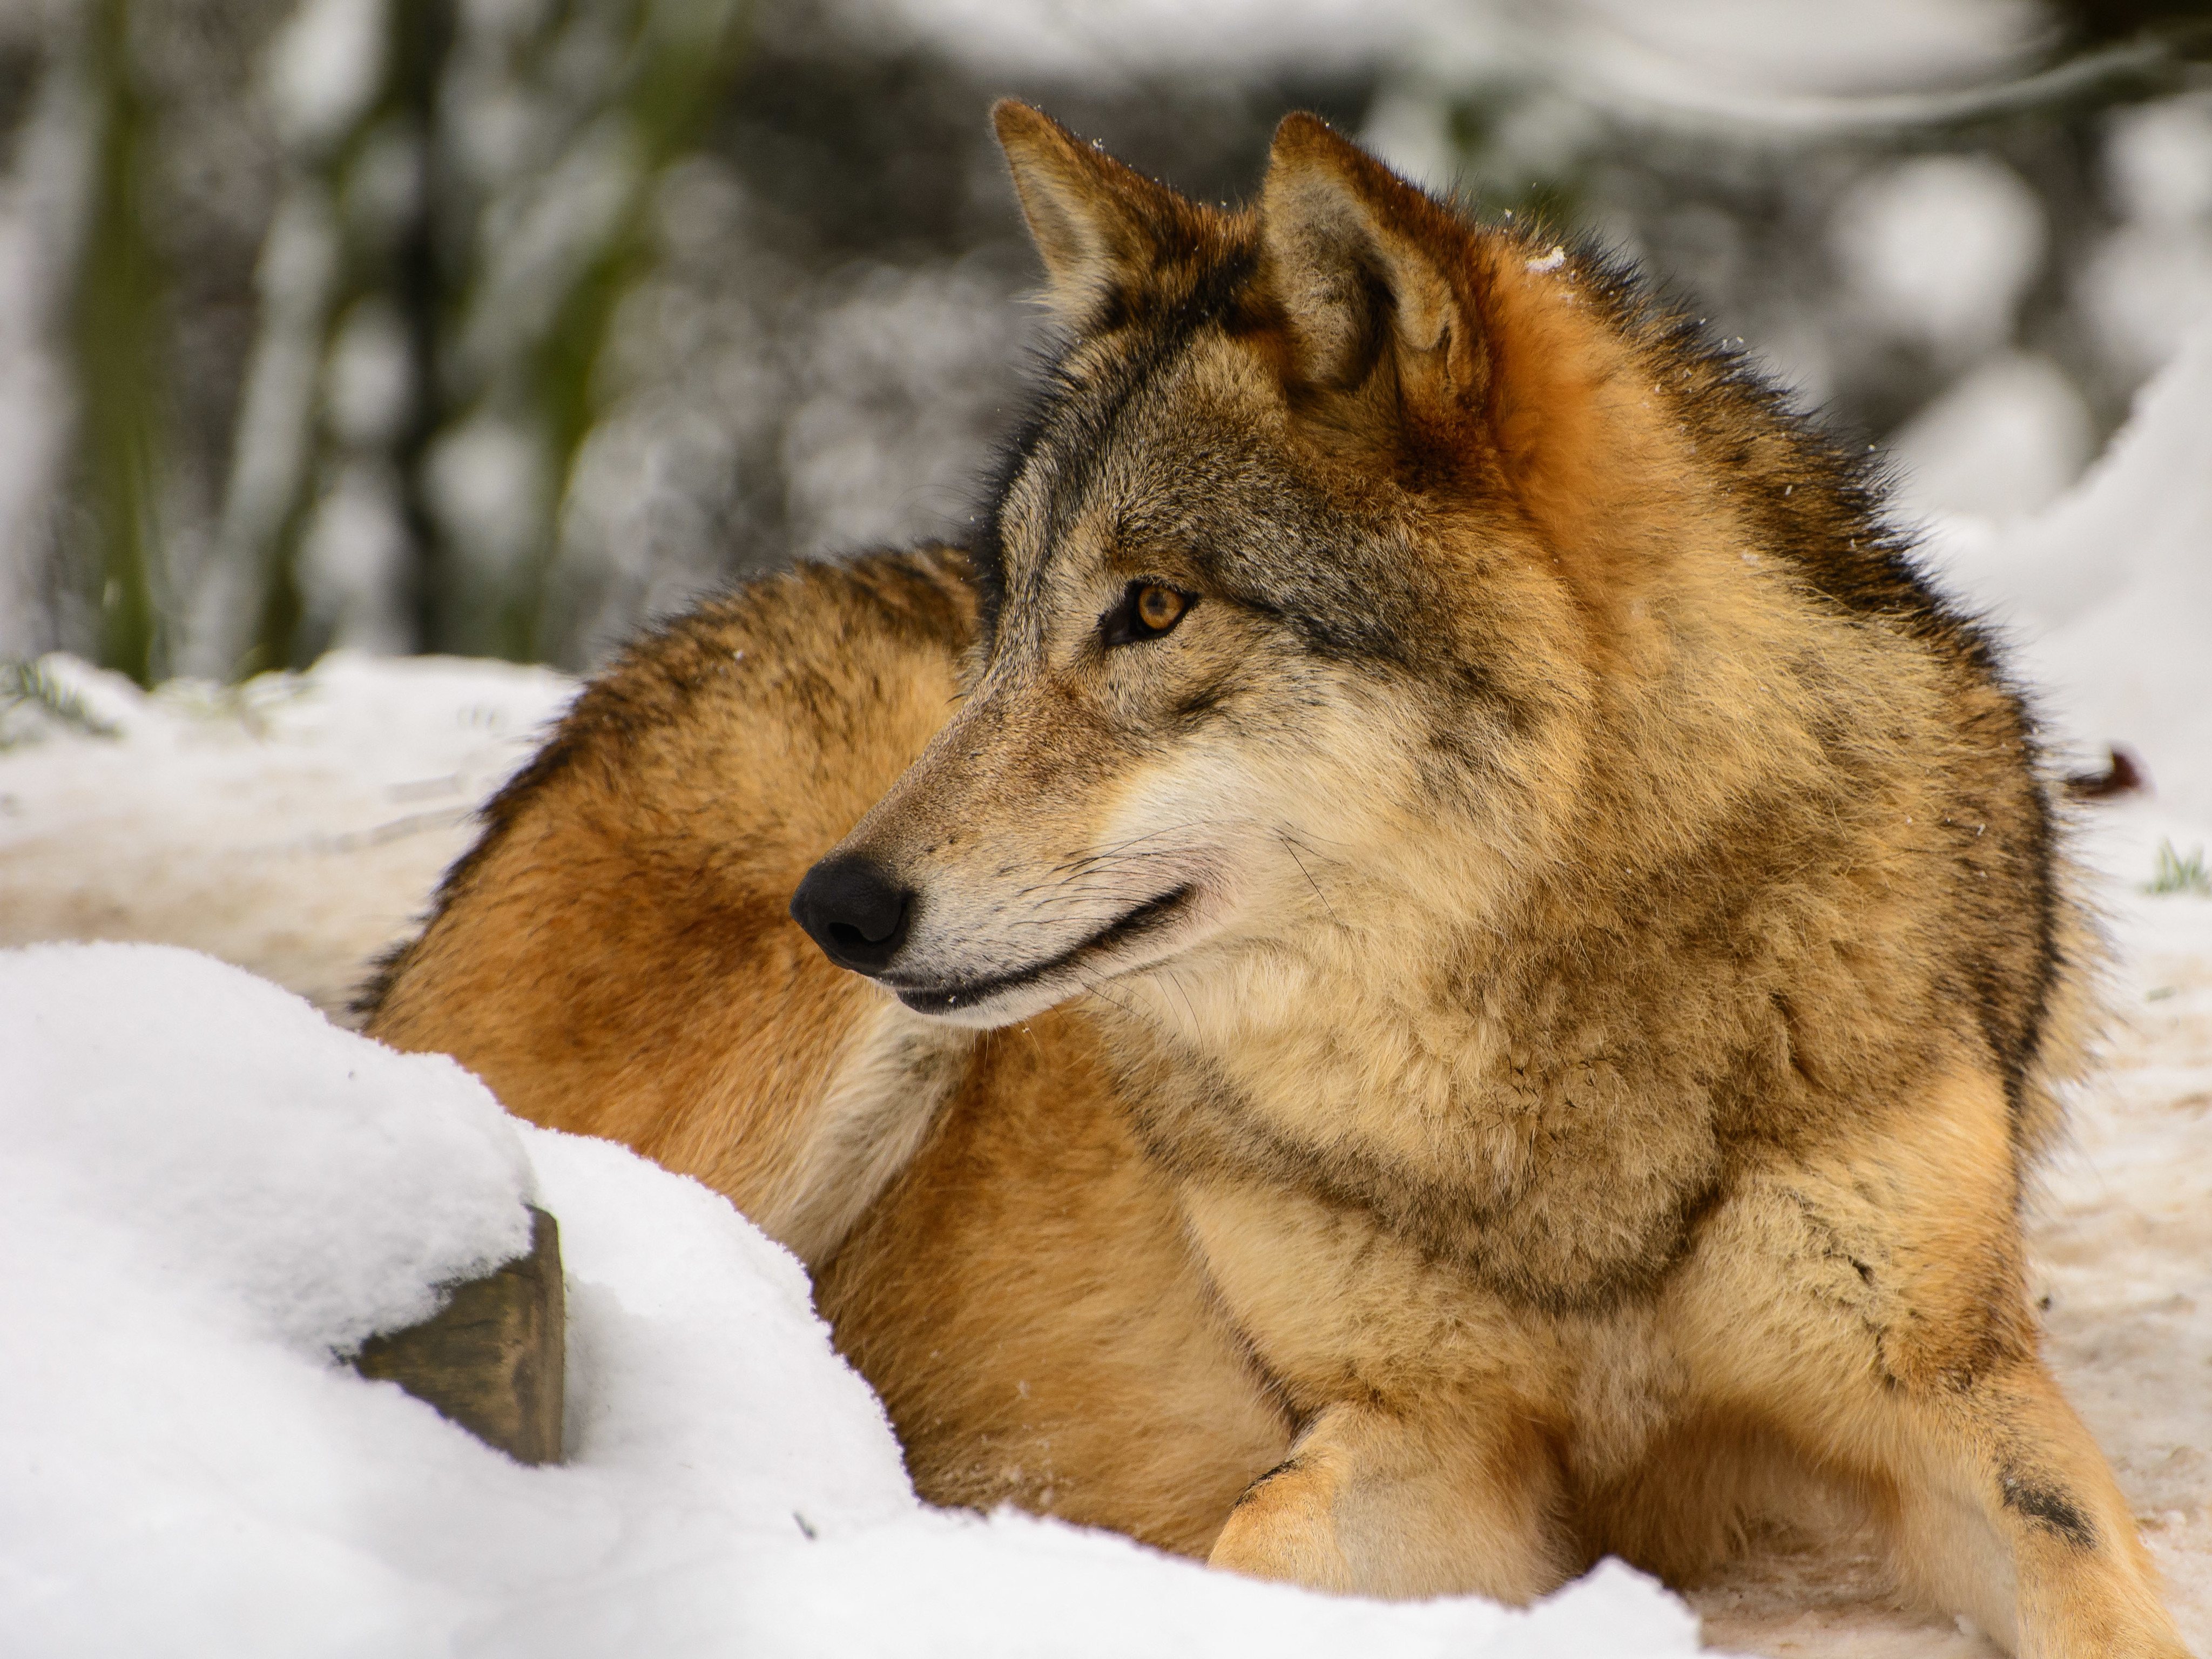 79290 download wallpaper animals, predator, wolf, profile screensavers and pictures for free